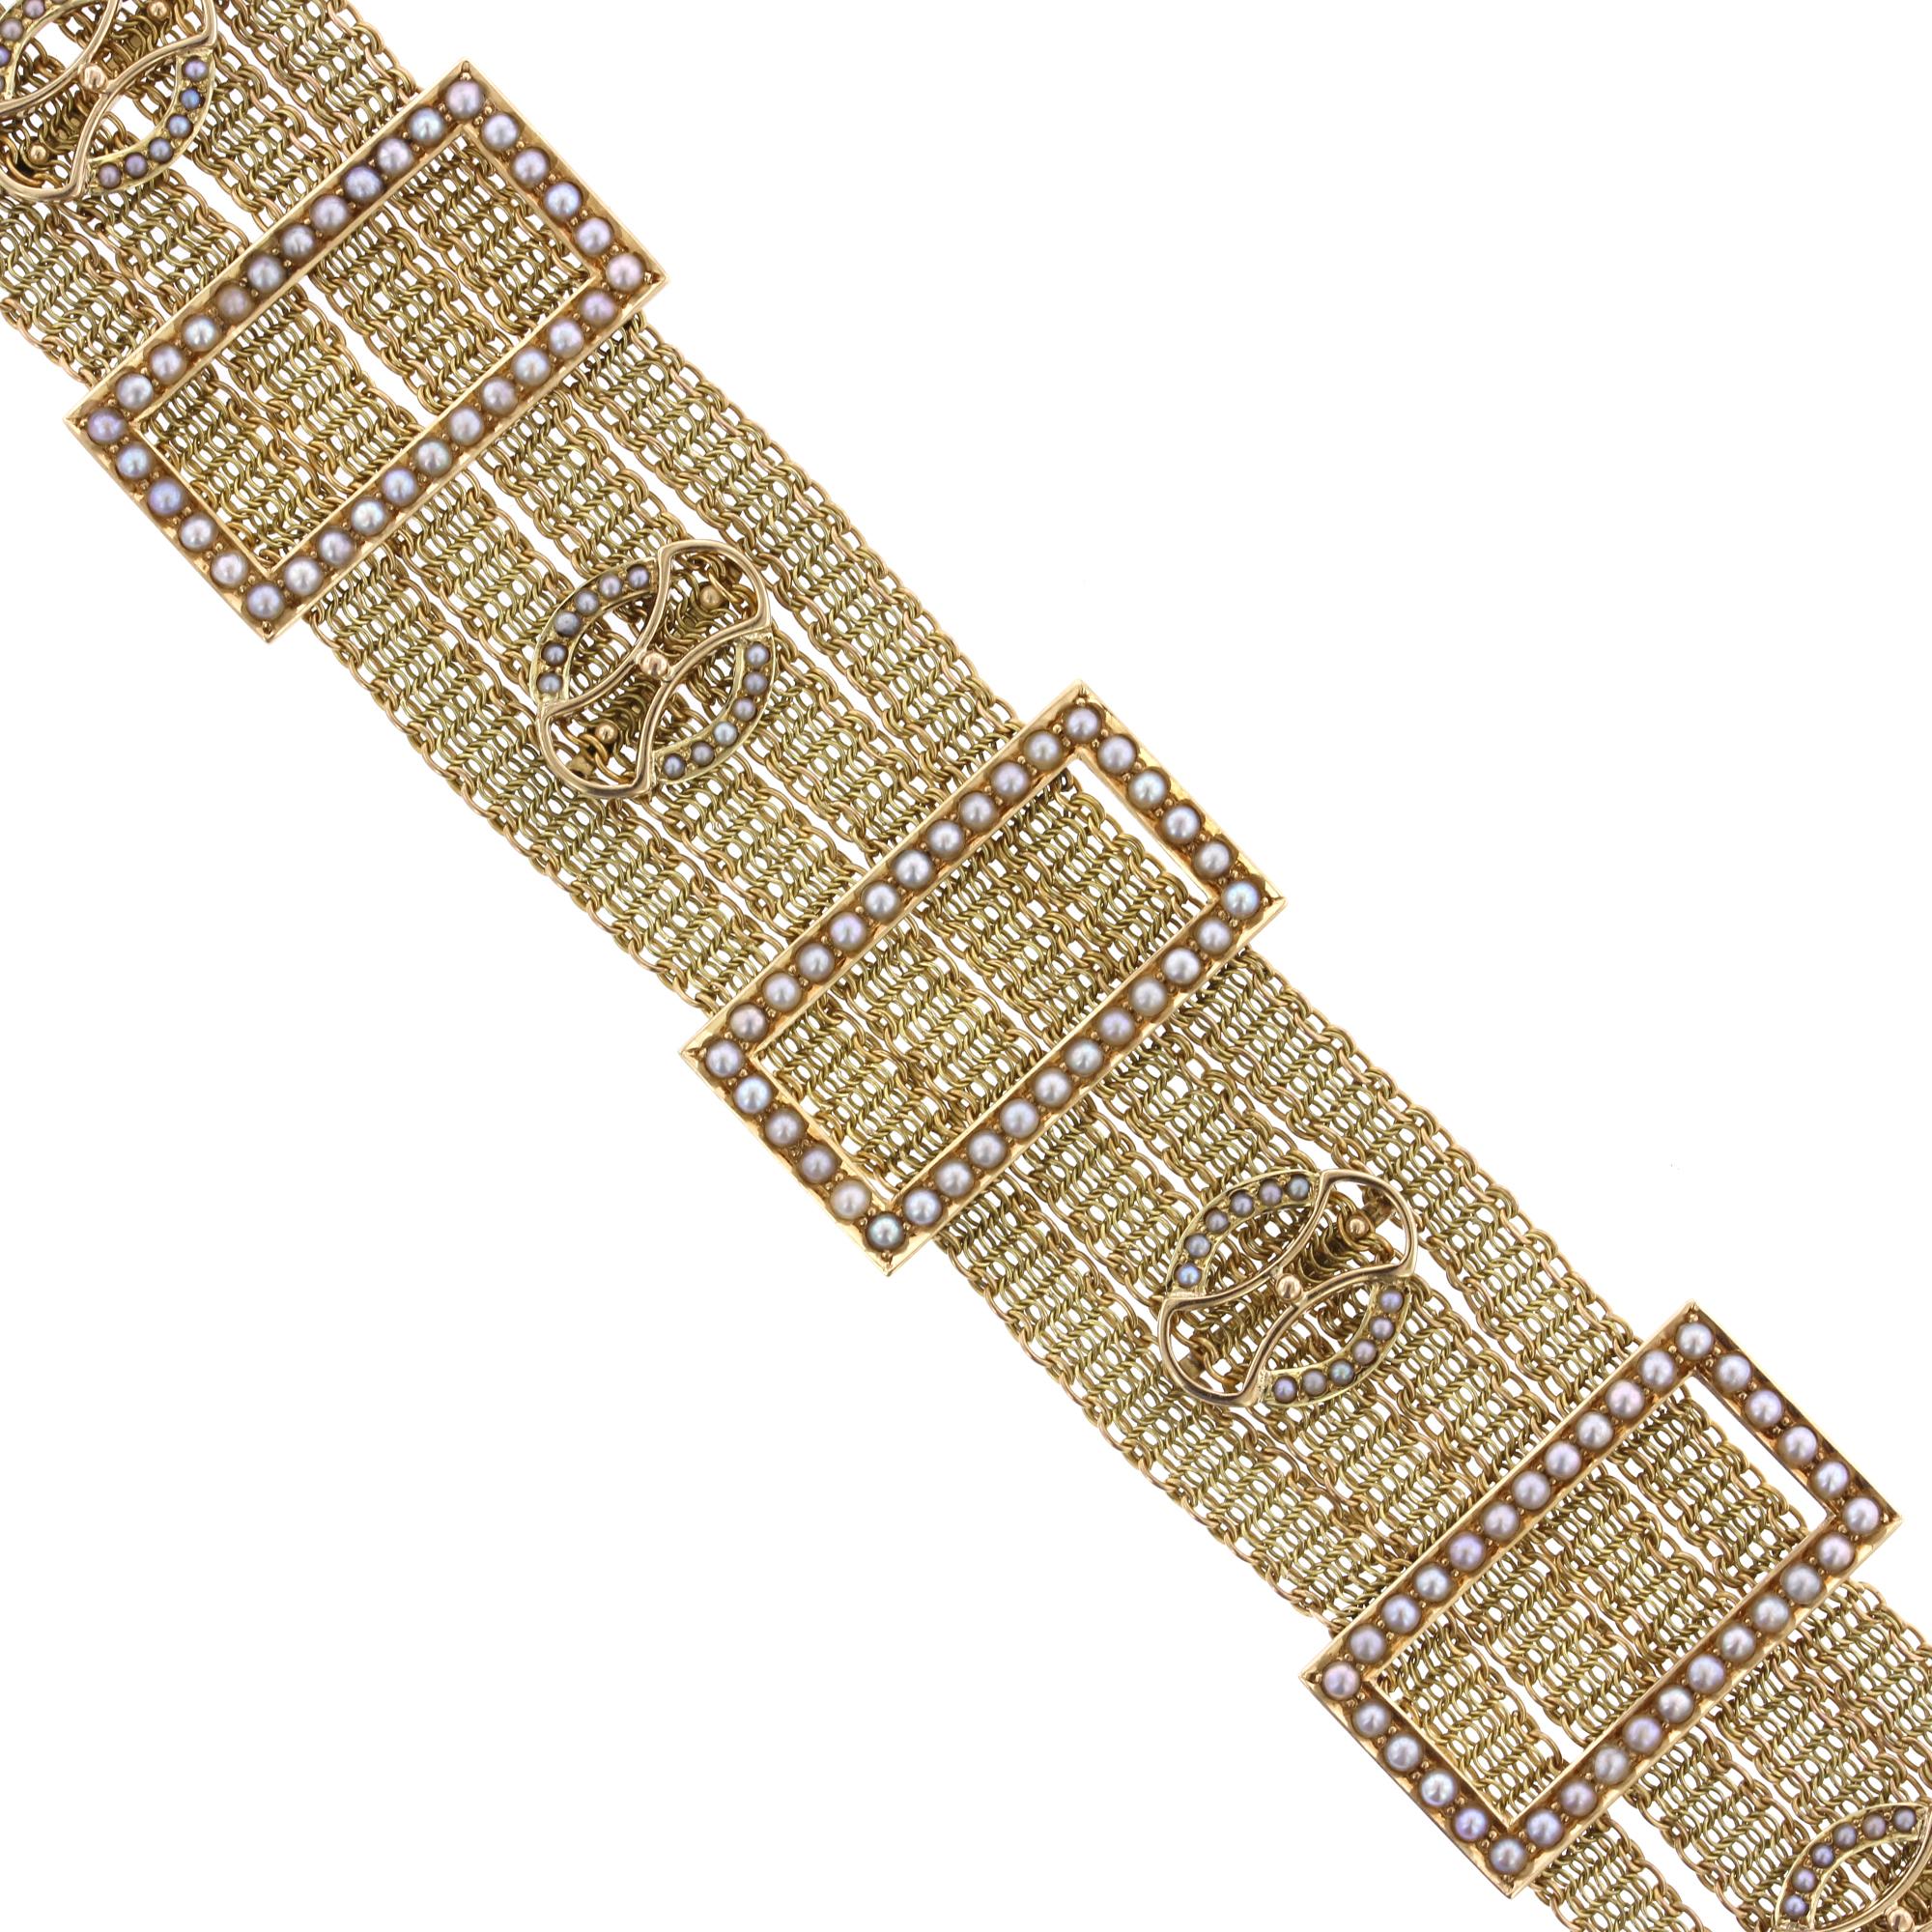 Antique 14K Yellow Gold Seed Pearl Bracelet. The multi chain bracelet is designed with stations set with seed pearls, width 1